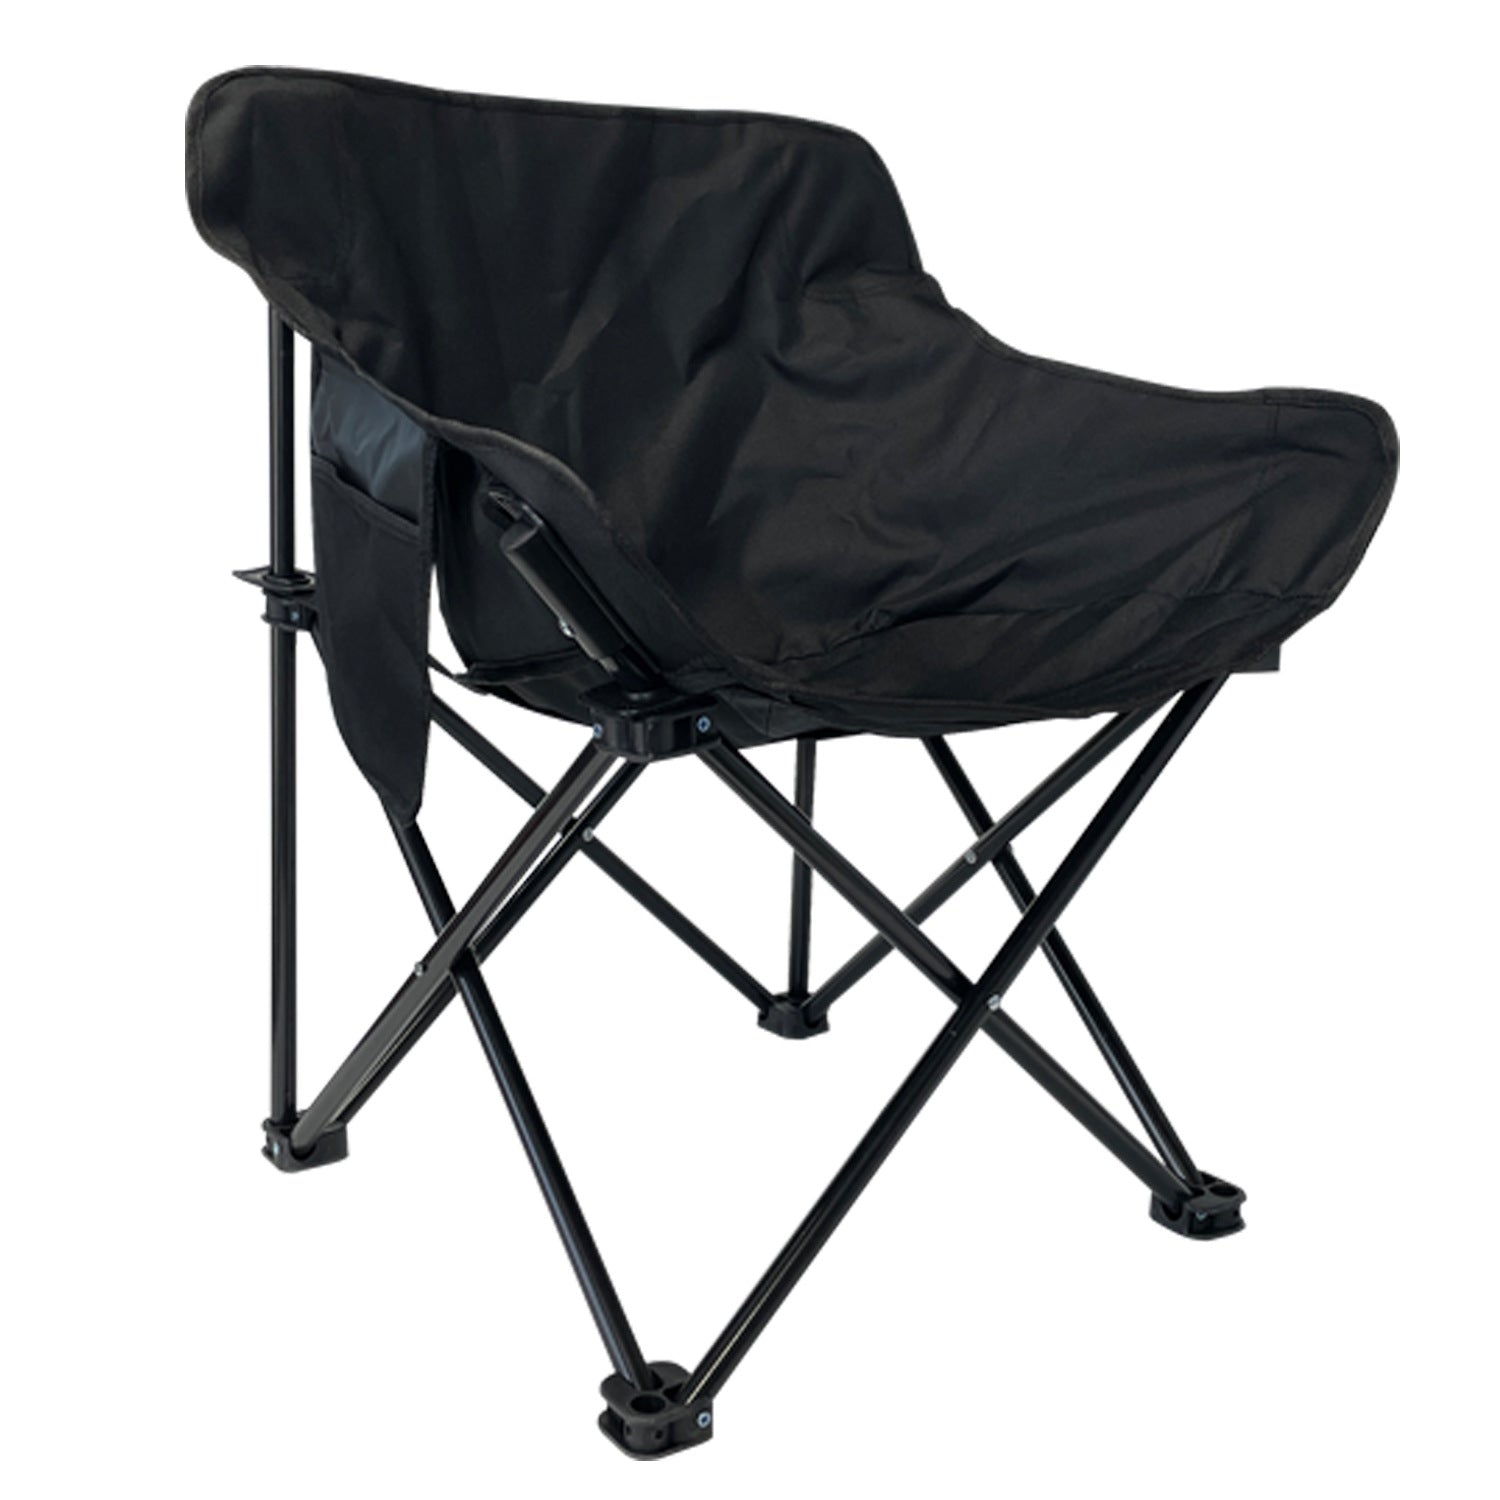 Black Oxford Versatile Moon Chair Portable For Outdoor And Indoor Use